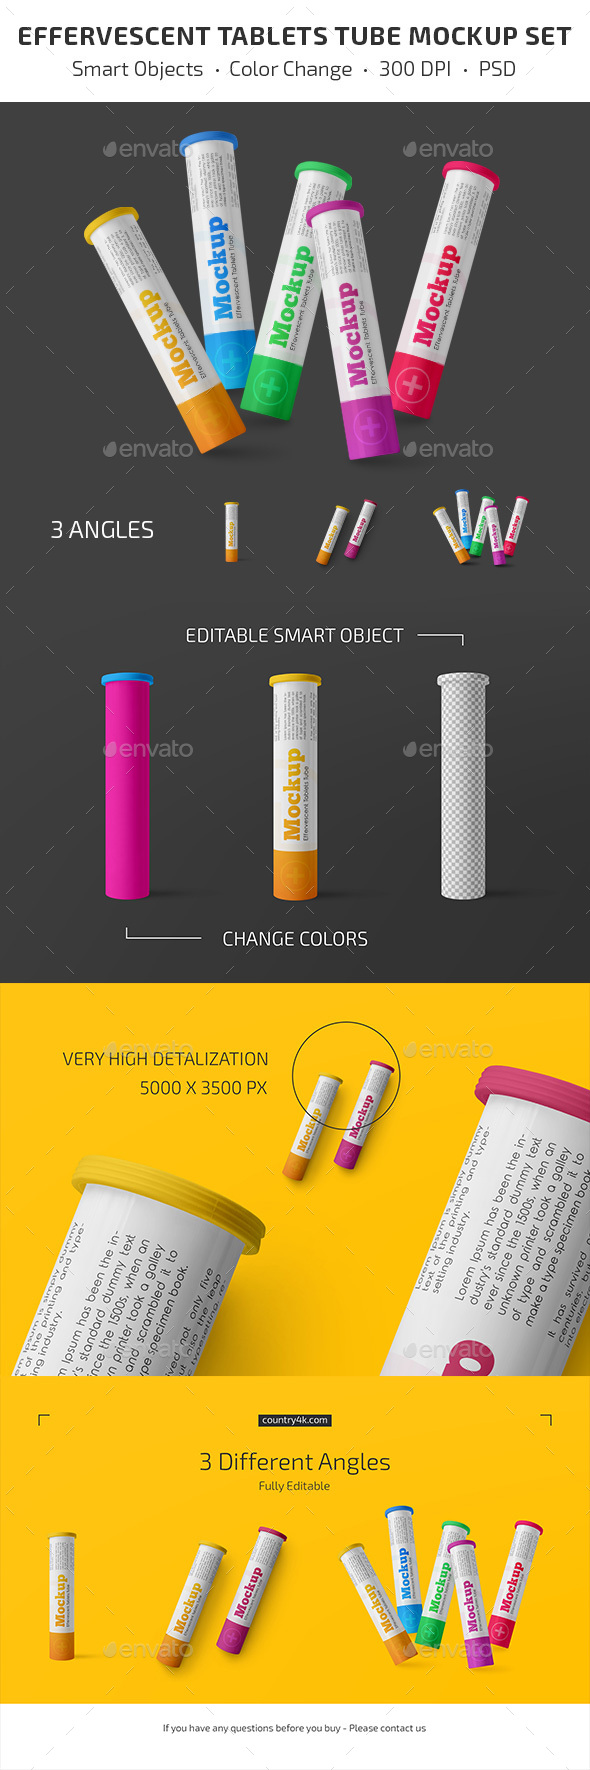 Download Glossy Plastic Effervescent Tablets Tube Mockup Set By Country4k Graphicriver